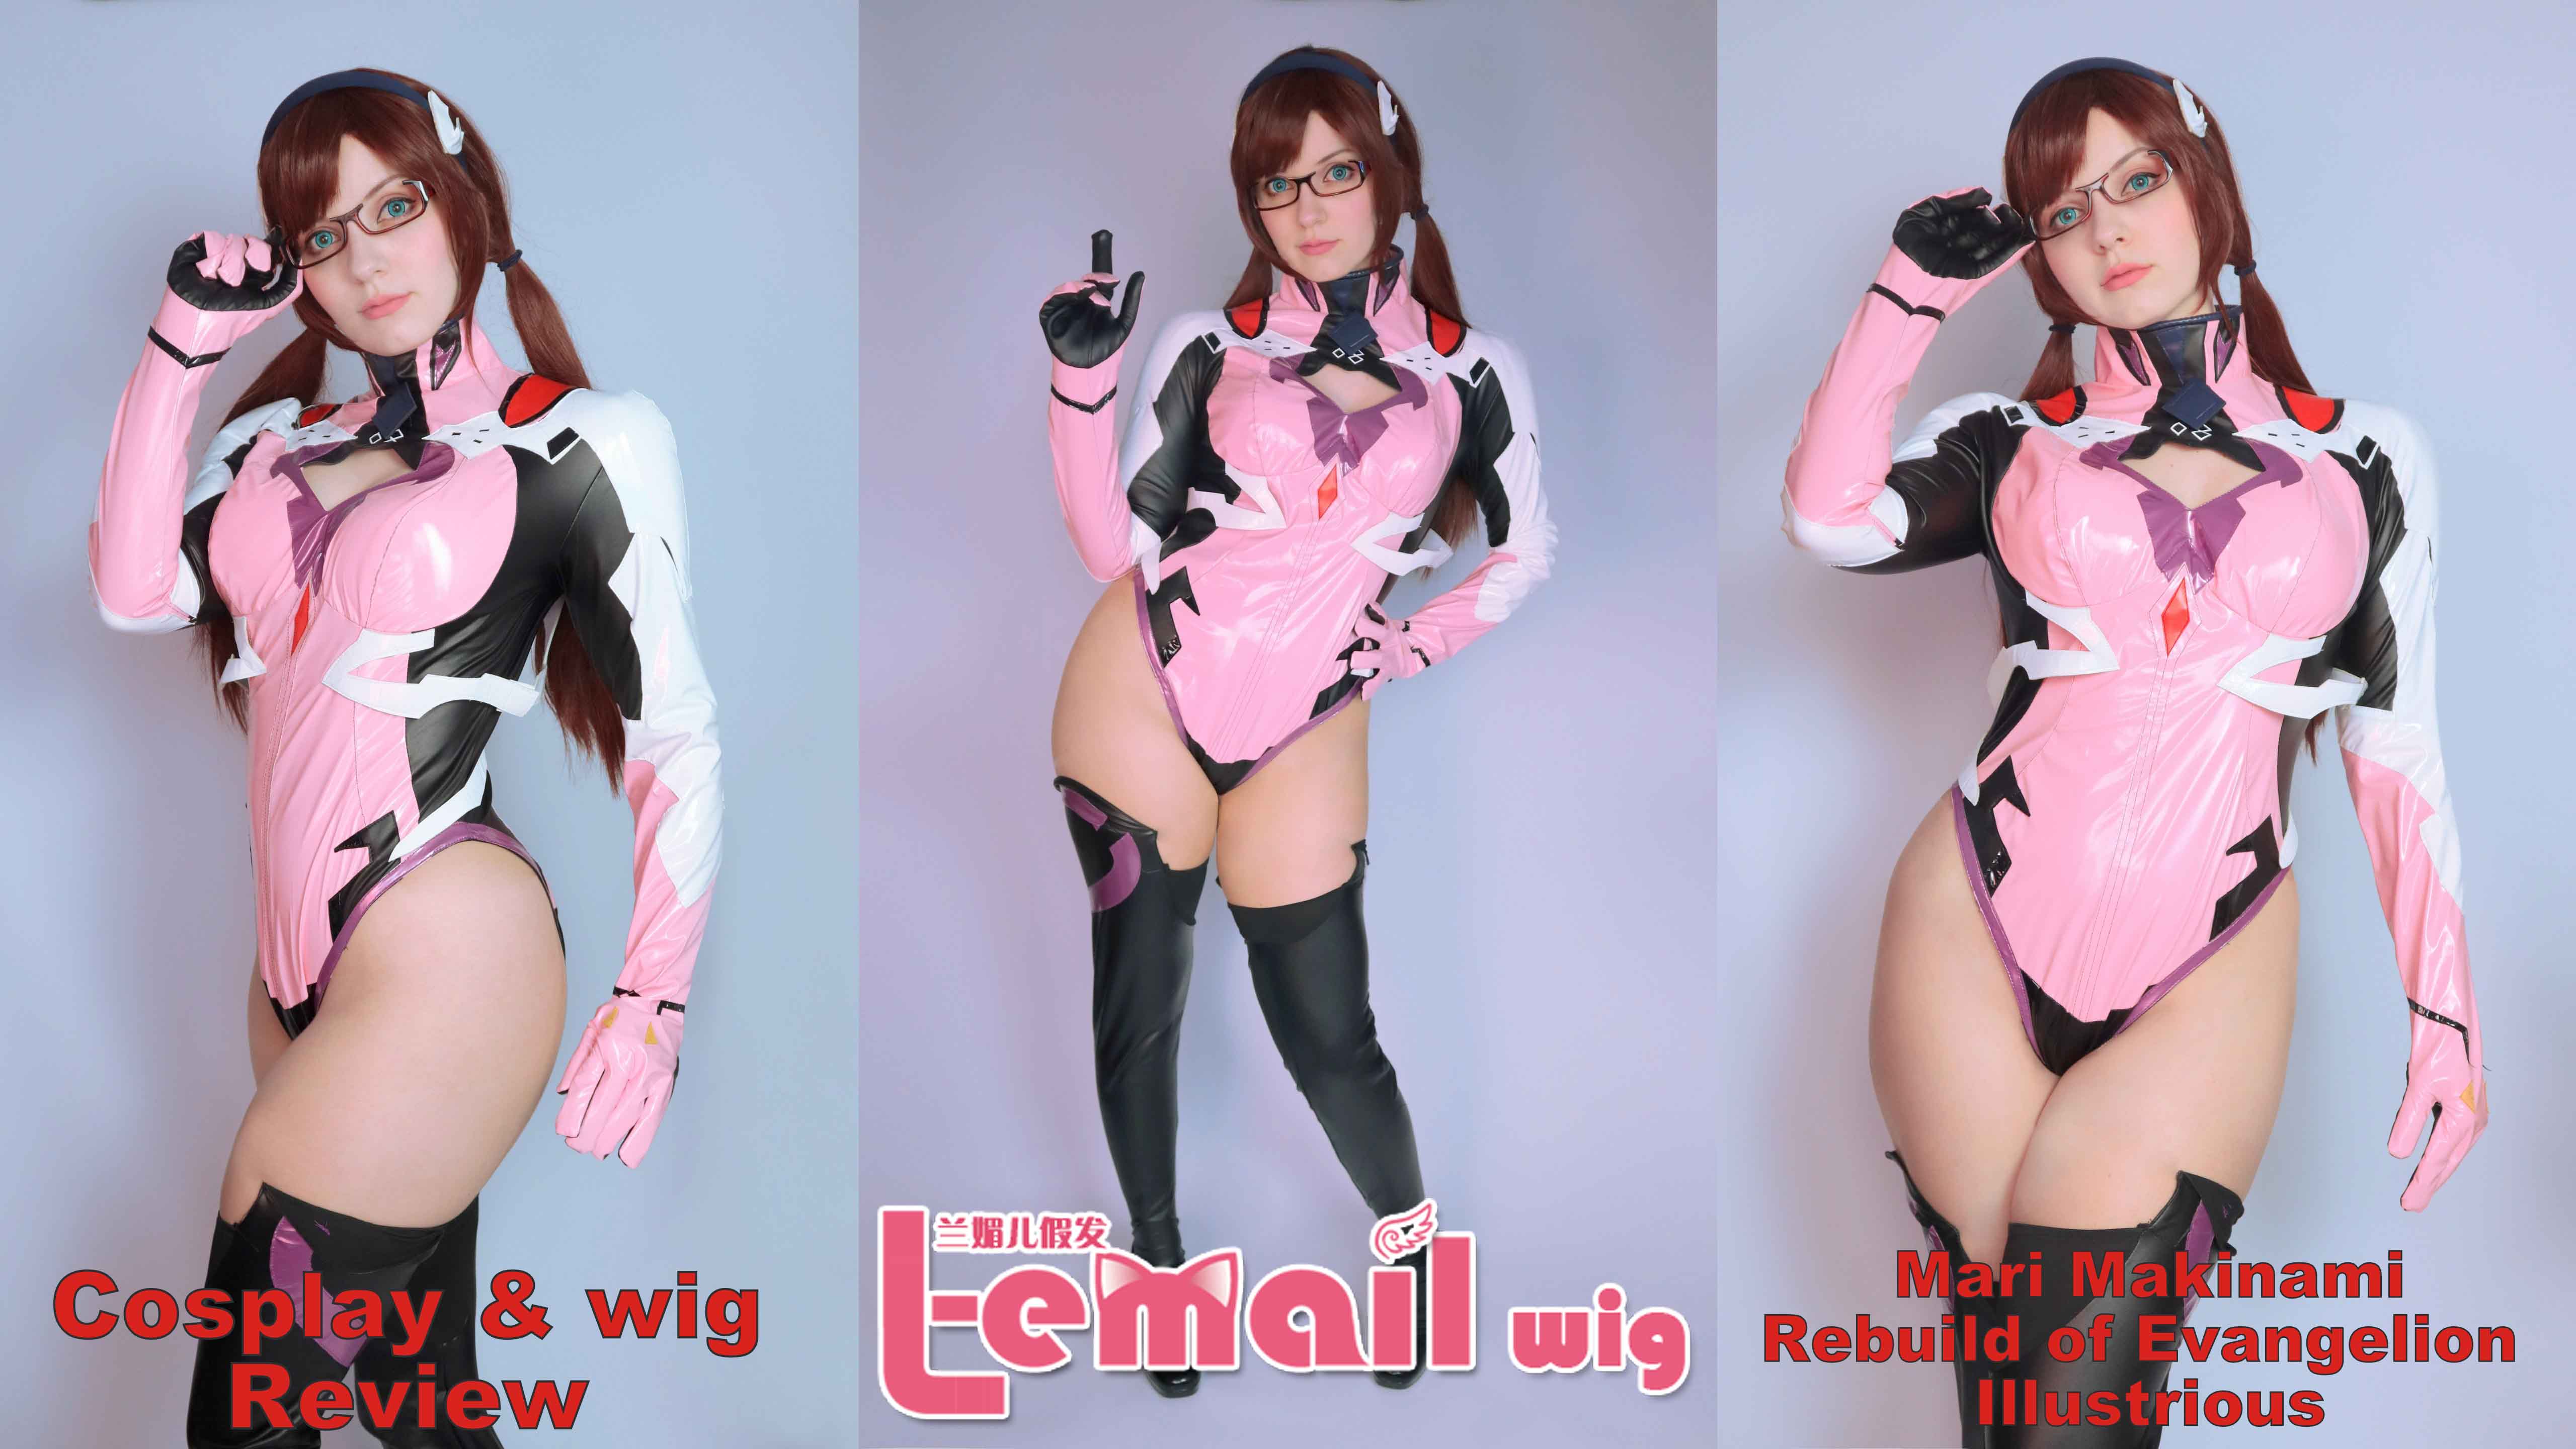 Cosplay & wig review: Mari Makinami (Rebuild of Evangelion Illustrious) from L-email wigs